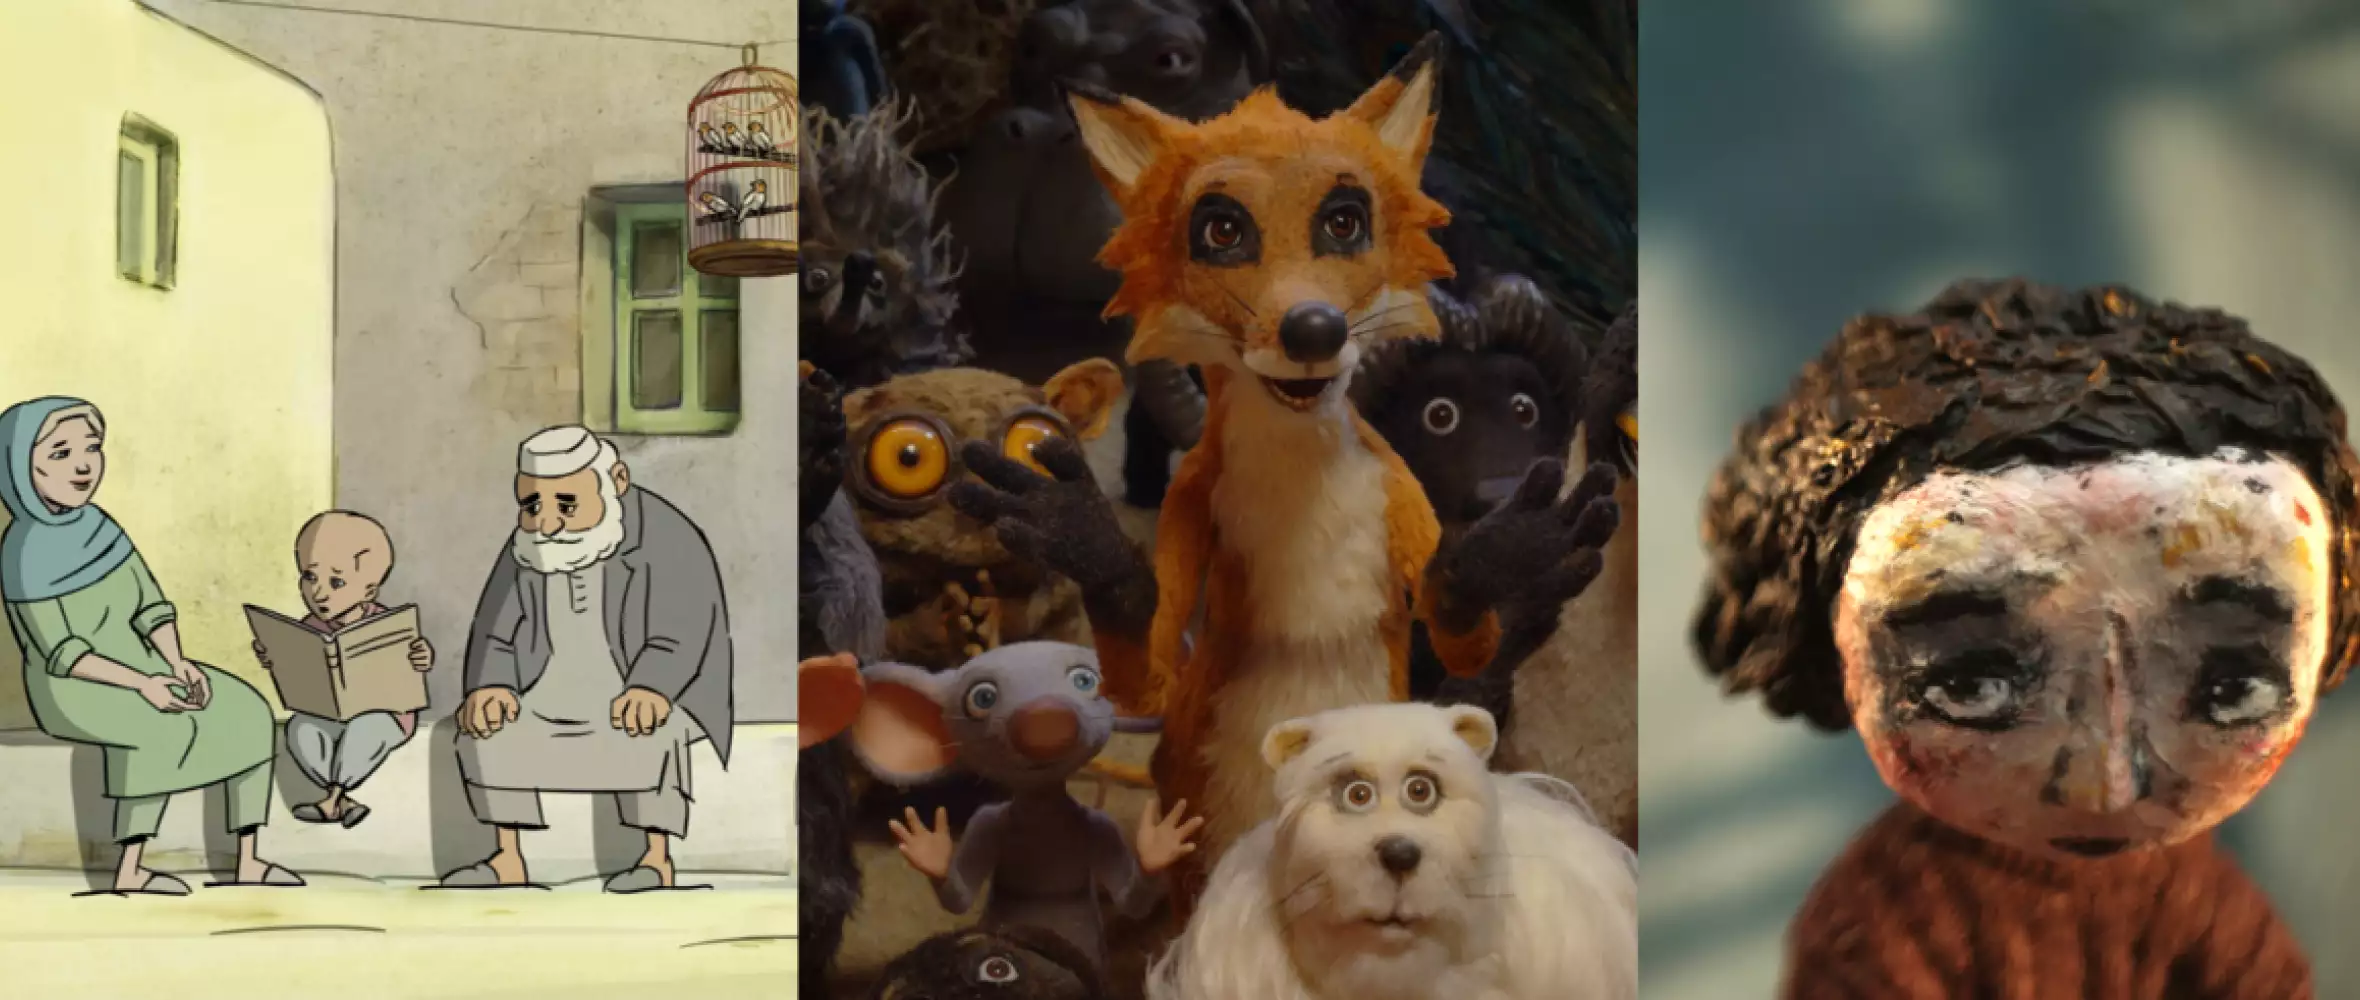 Anima Brussels is loaded with contemporary Czech animation | Czech Film  Center